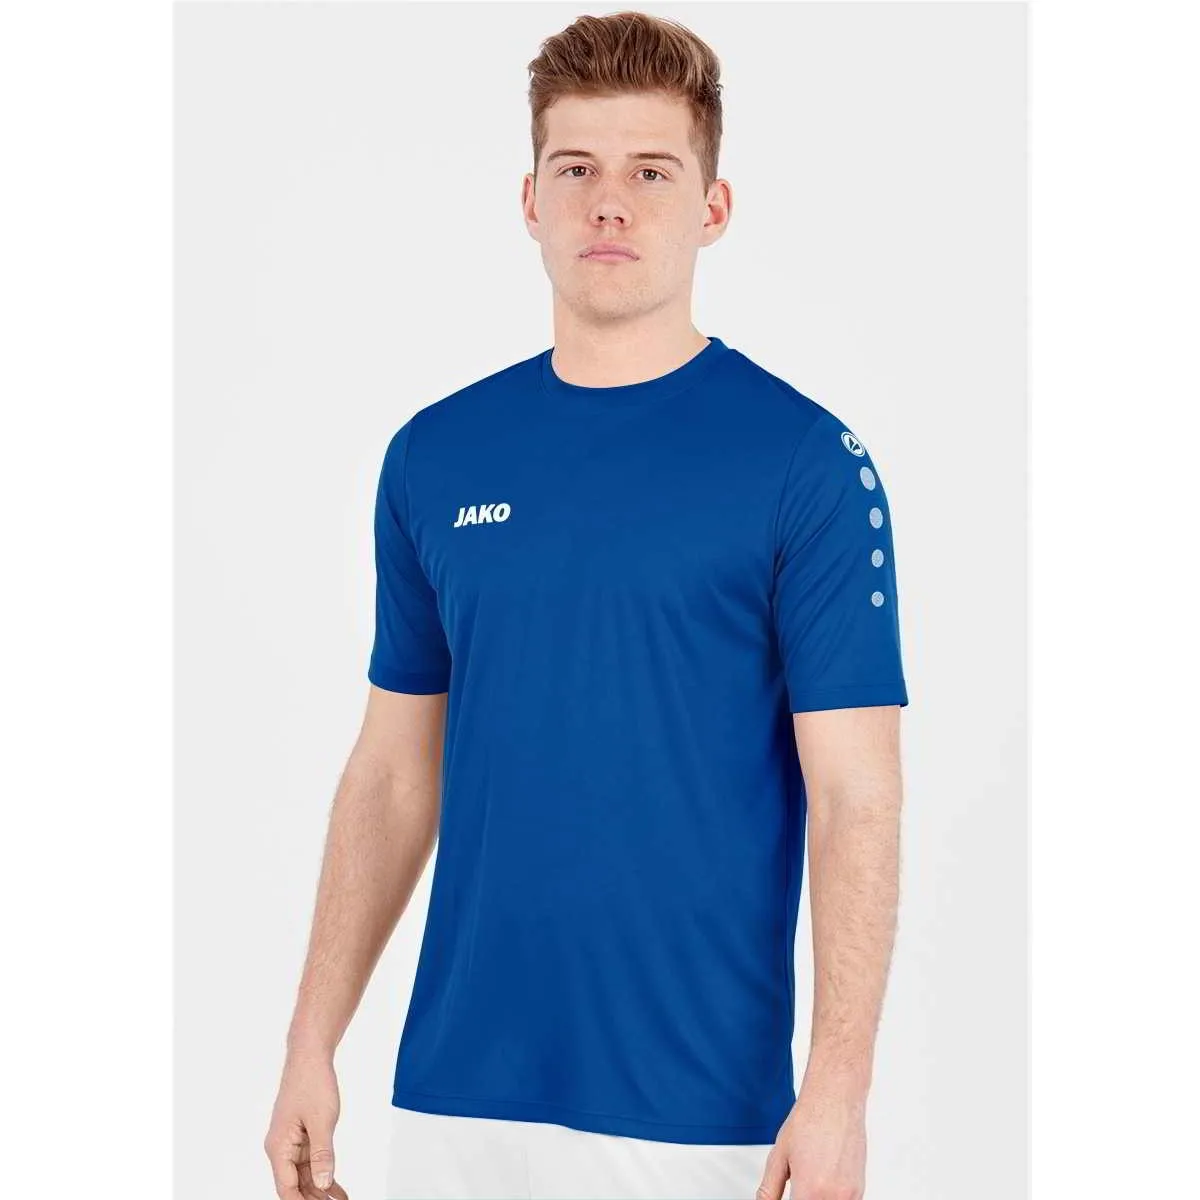 Maillot Jako Team manches courtes royal